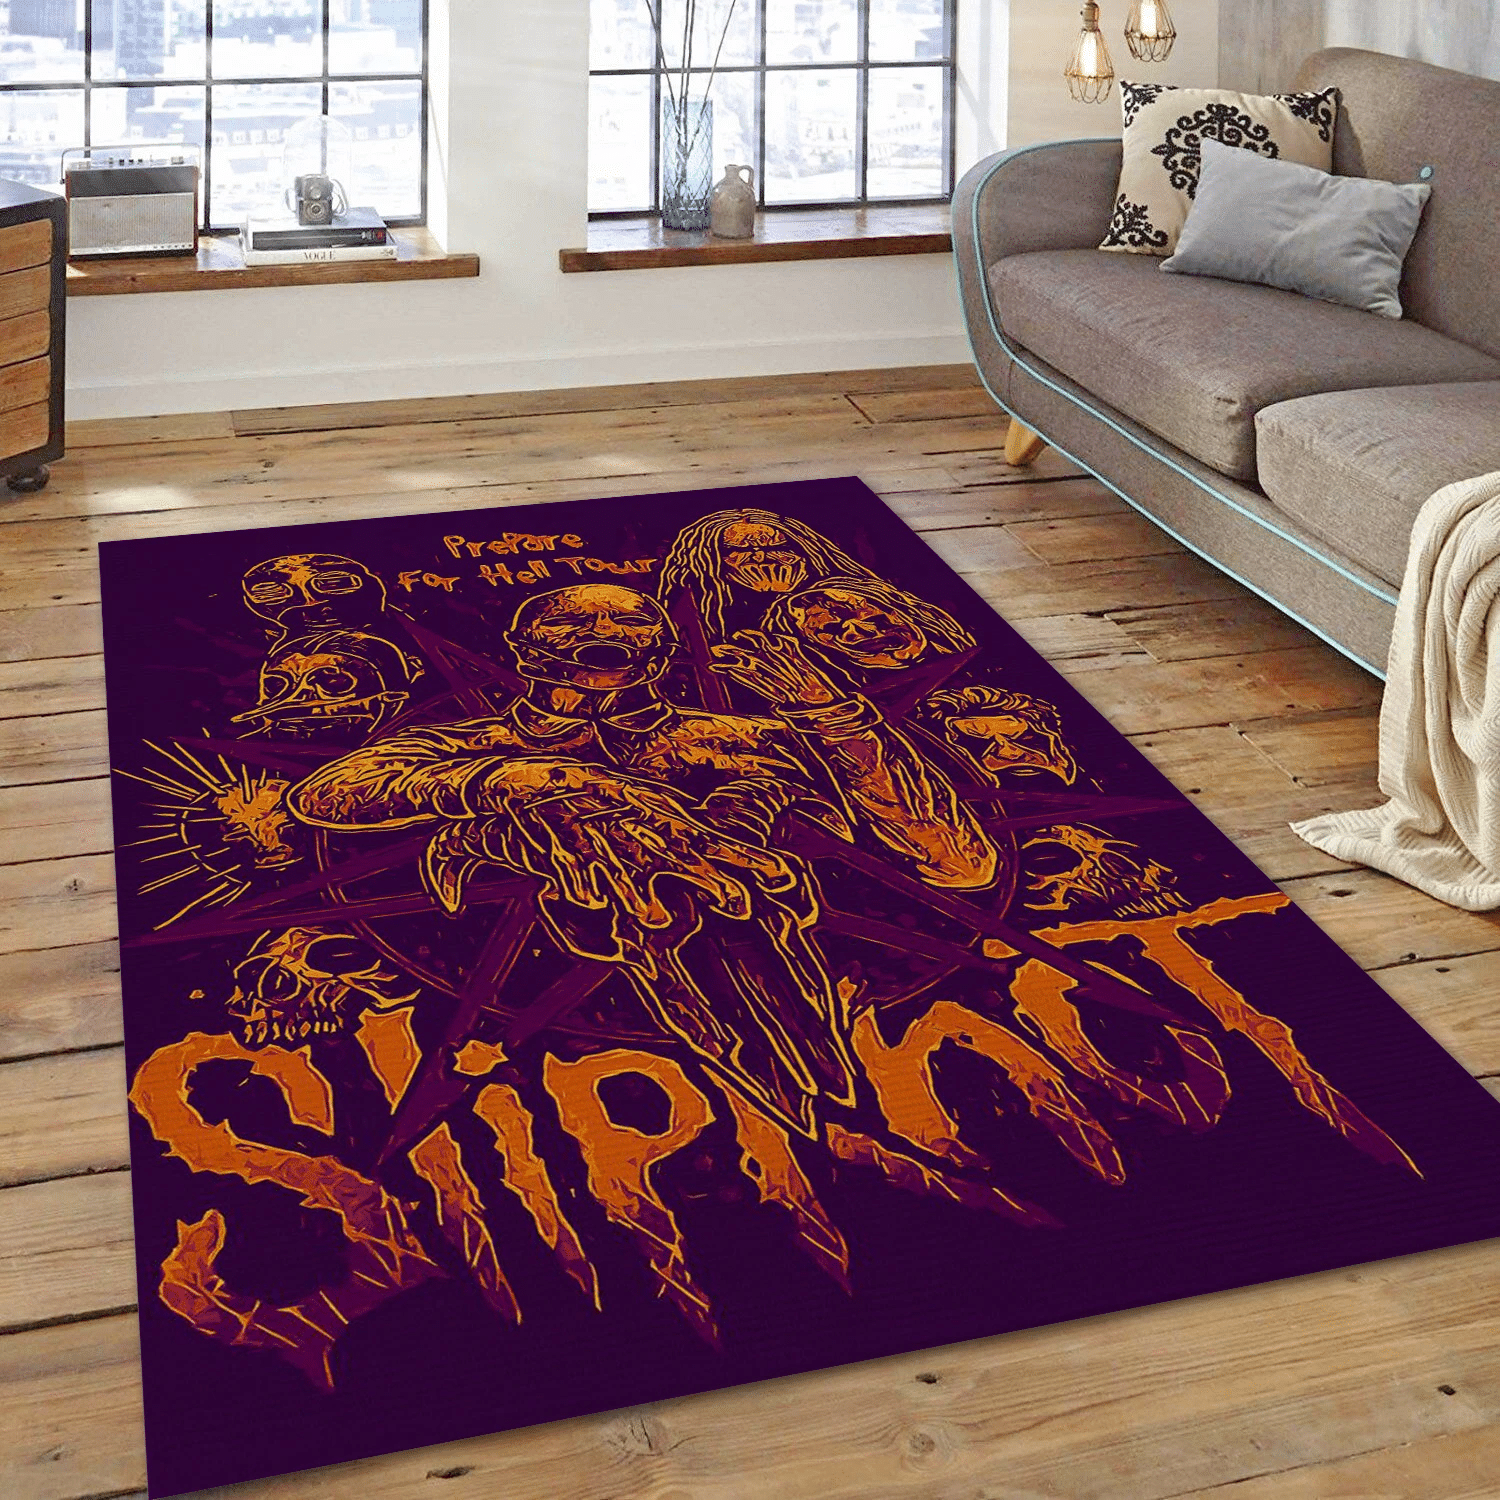 Slipknot Purple And Gold Music Area Rug For Christmas, Living Room  Rug - Floor Decor - Indoor Outdoor Rugs 1